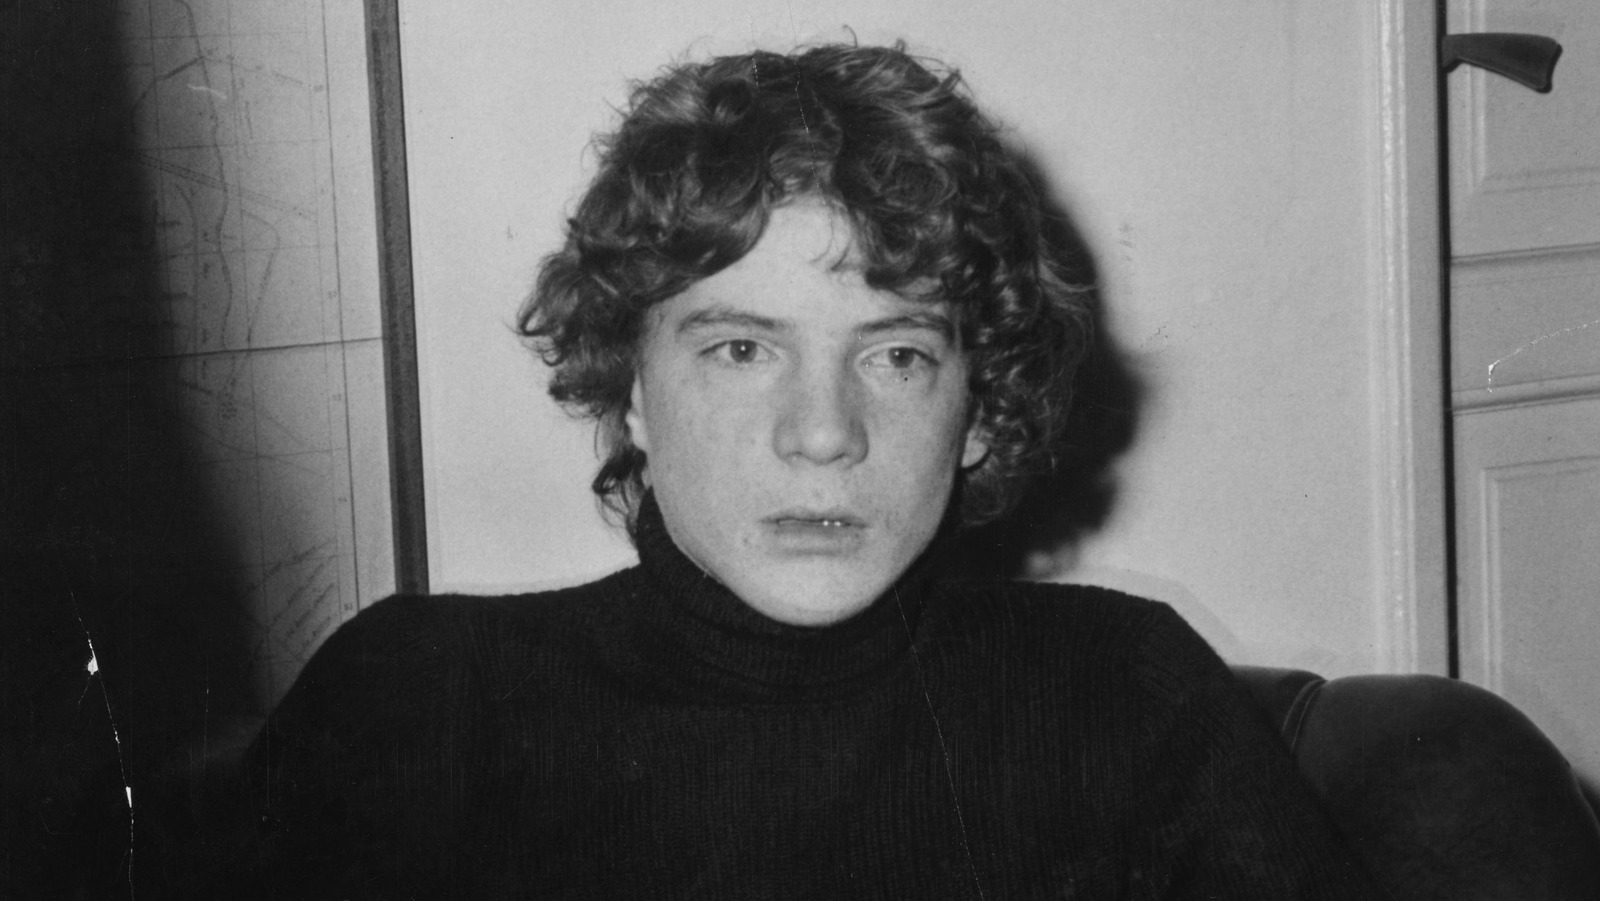 The True Story Behind John Paul Getty III's 1973 Kidnapping